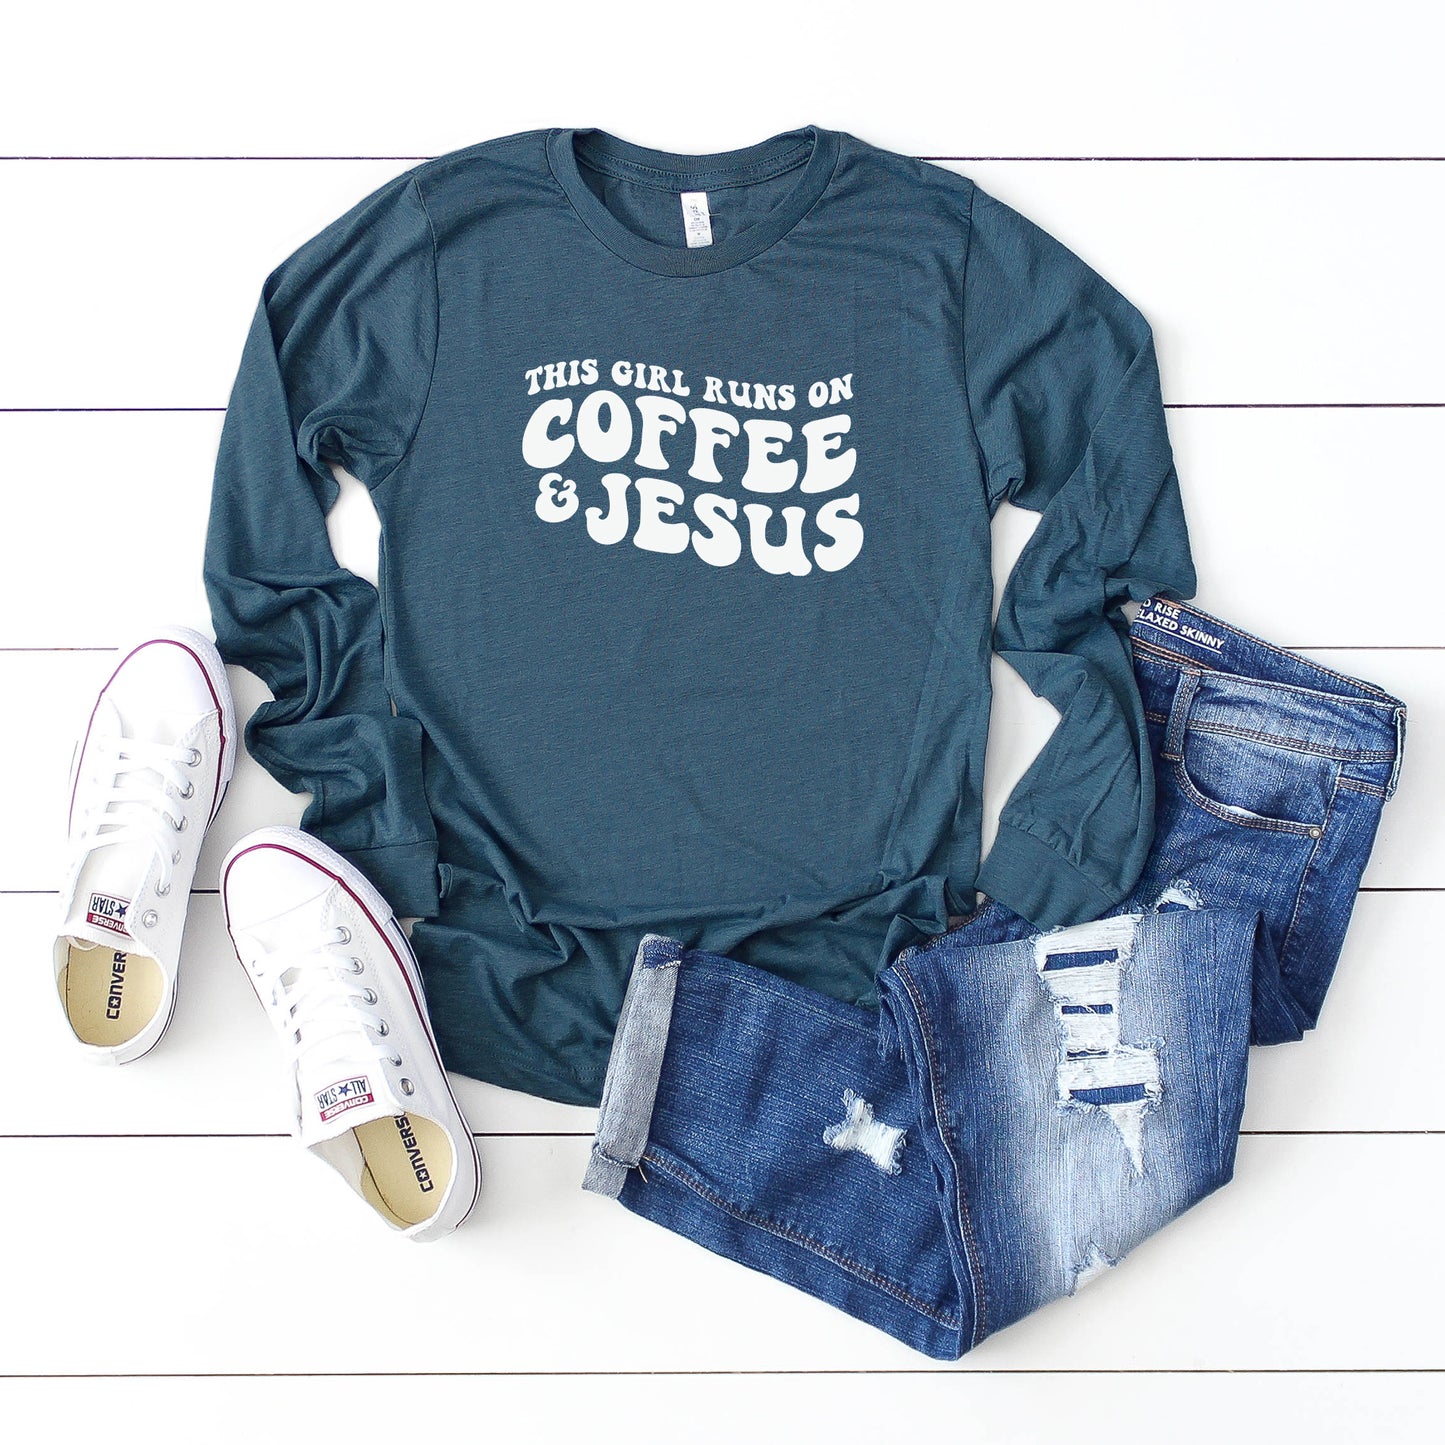 This Girl Runs On Coffee And Jesus | Long Sleeve Crew Neck